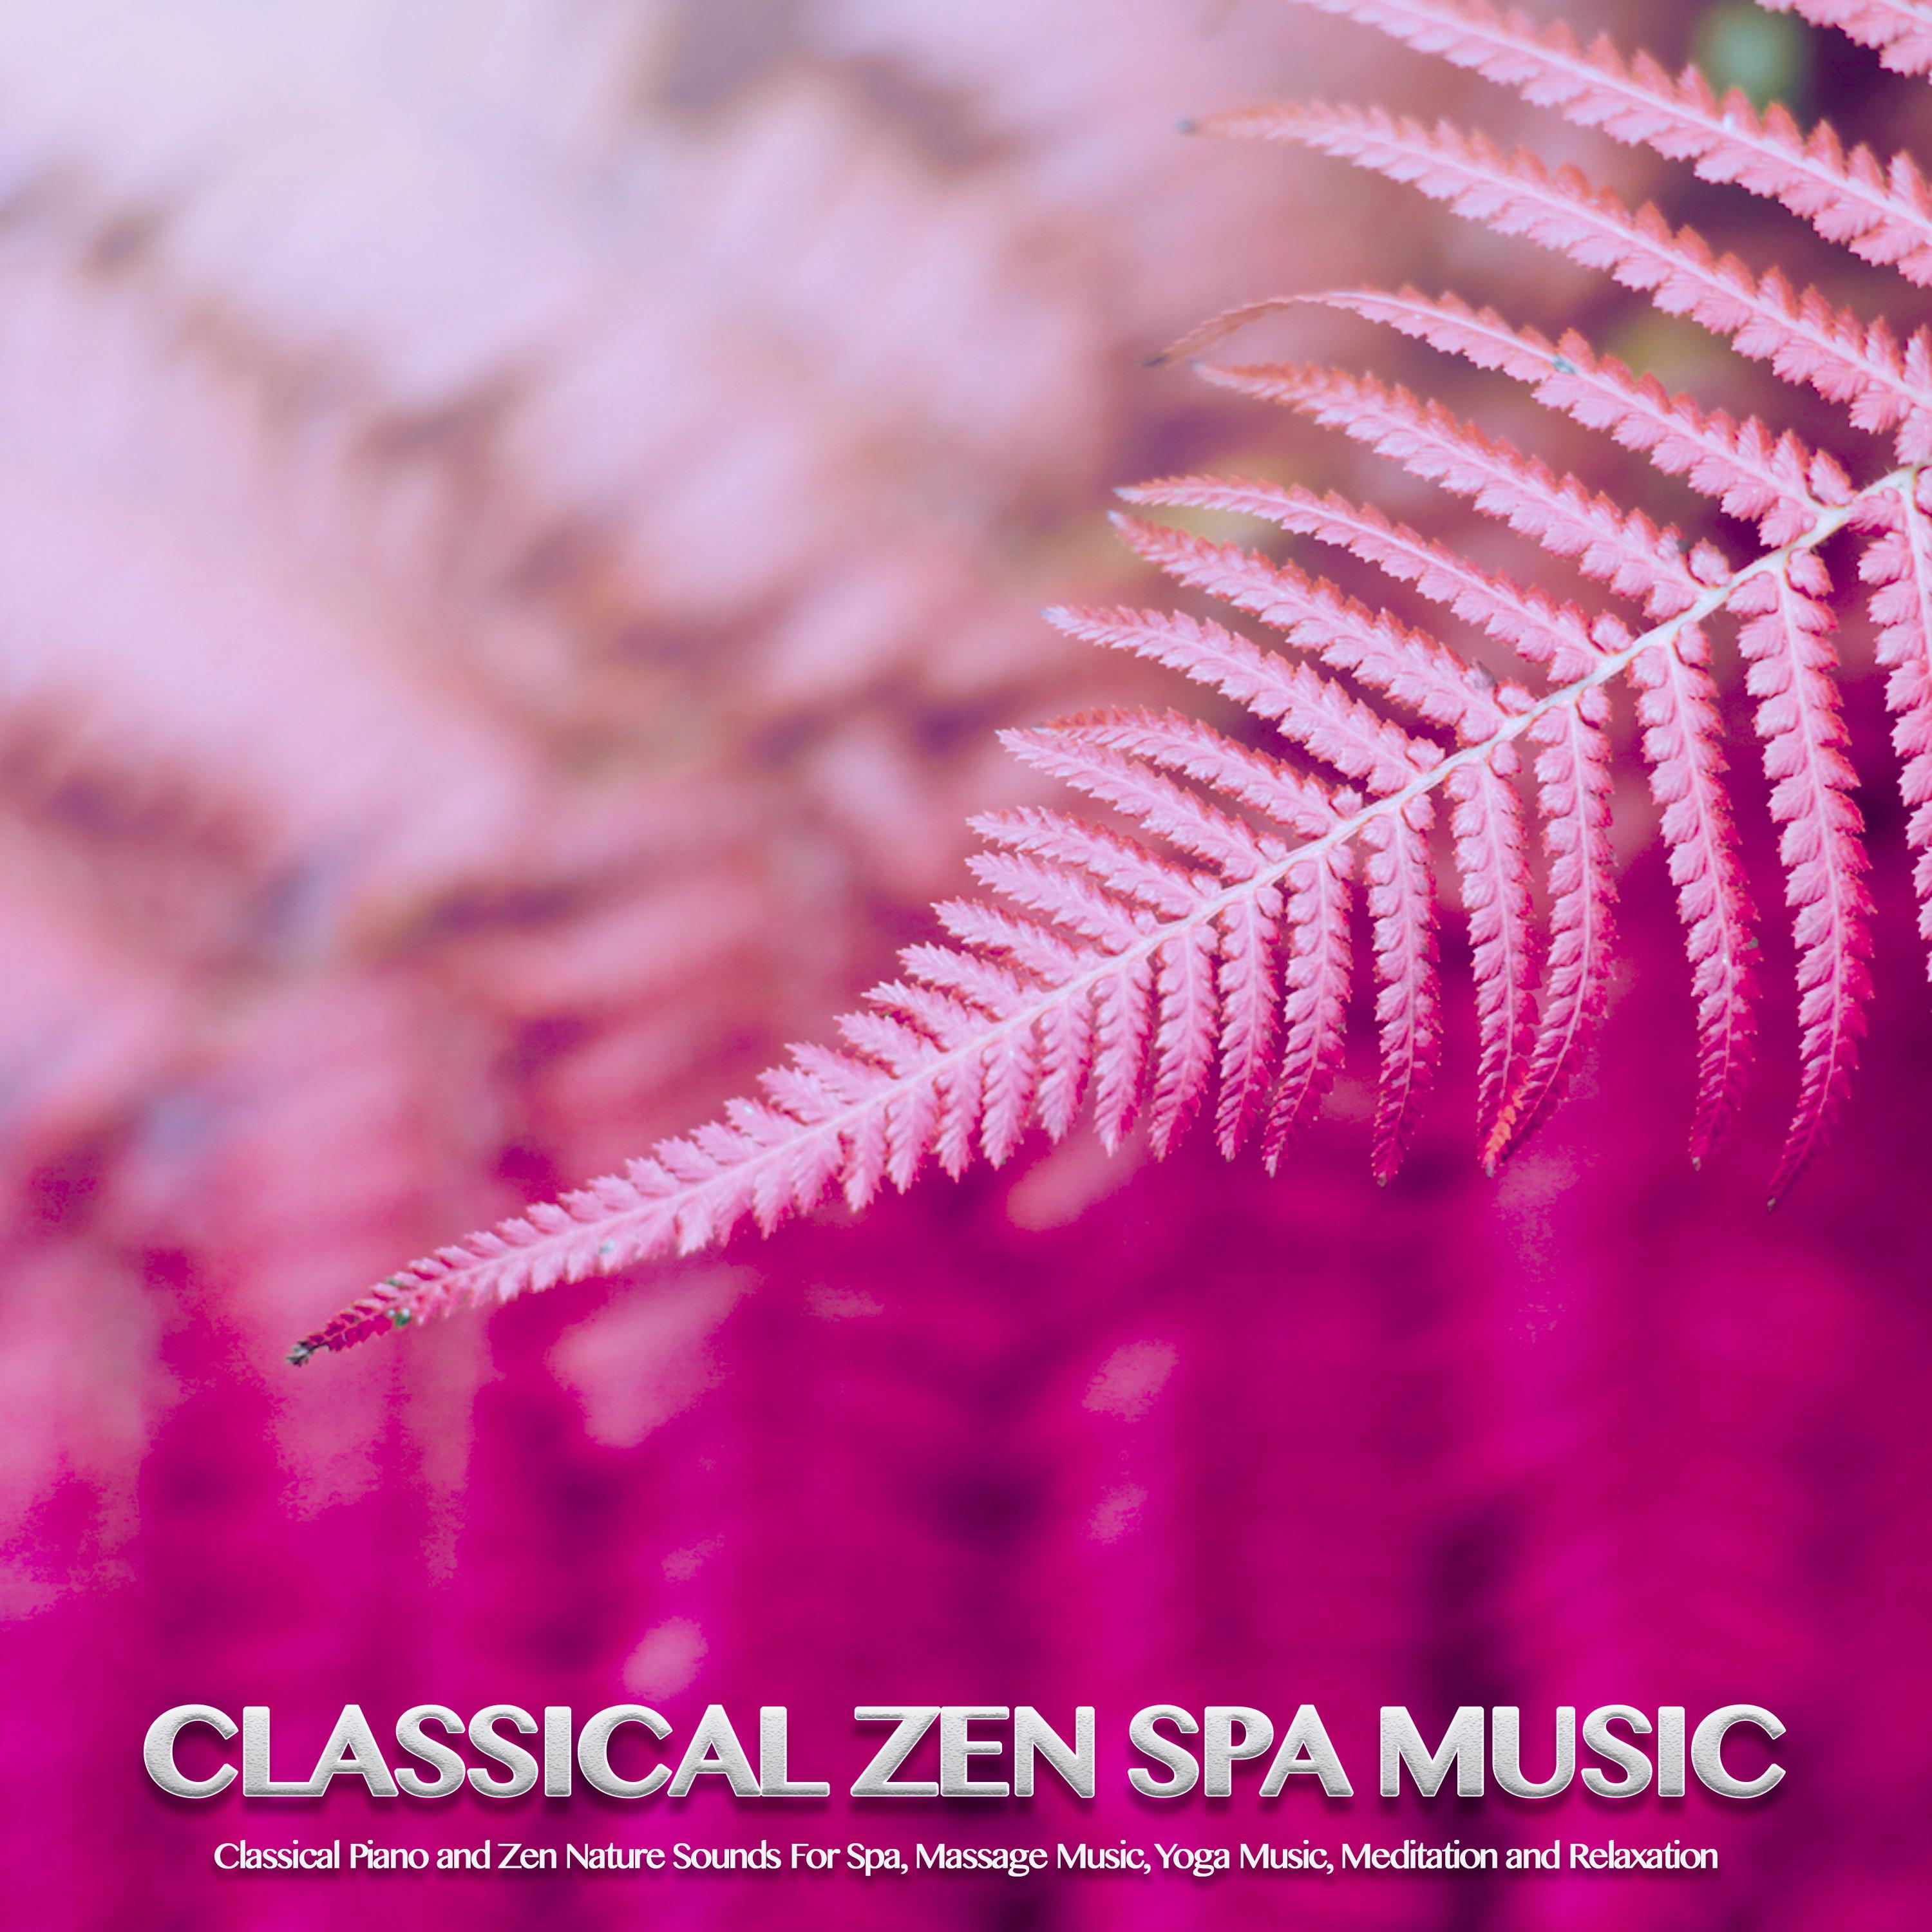 Classical Zen Spa Music: Classical Piano and Zen Nature Sounds For Spa, Massage Music, Yoga Music, Meditation and Relaxation